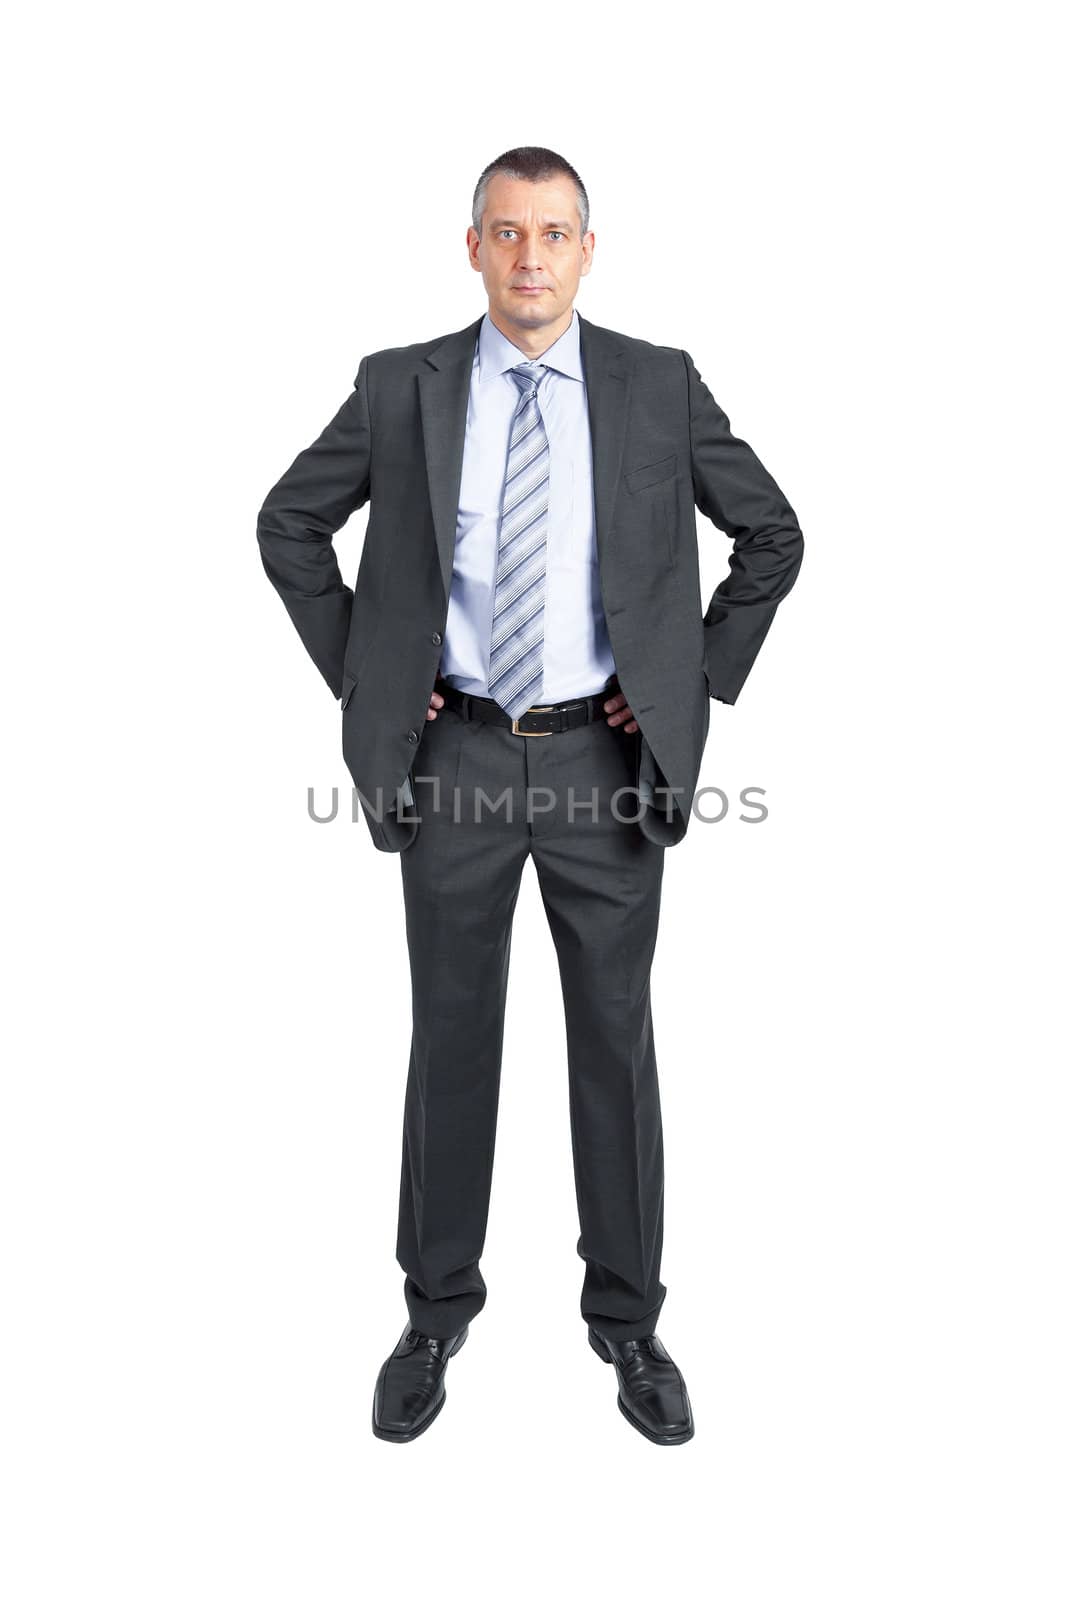 An image of a handsome business man isolated on white